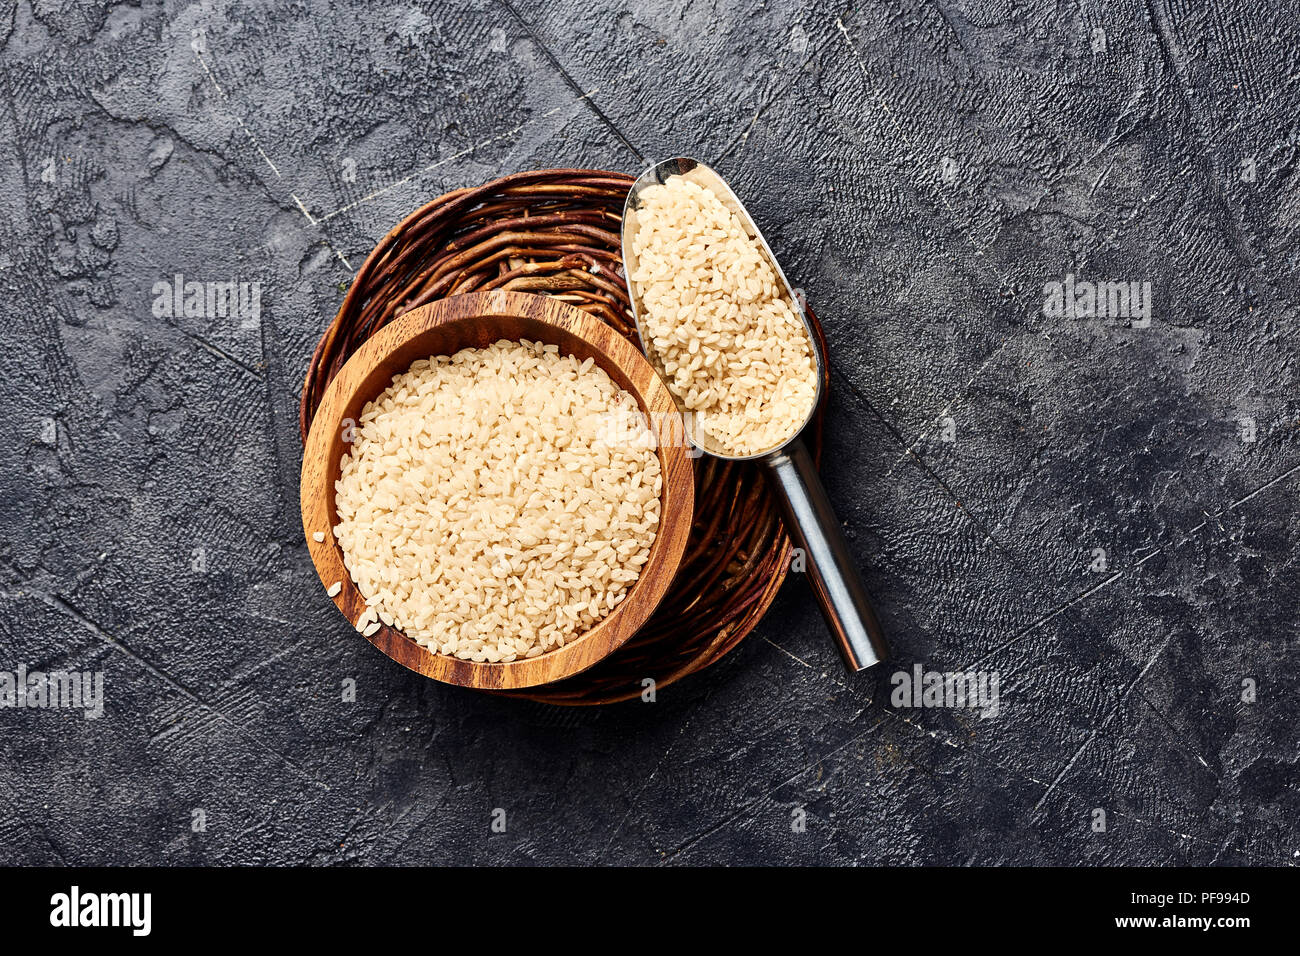 White rice in wooden bowl on black background. Top view of grains. Stock Photo